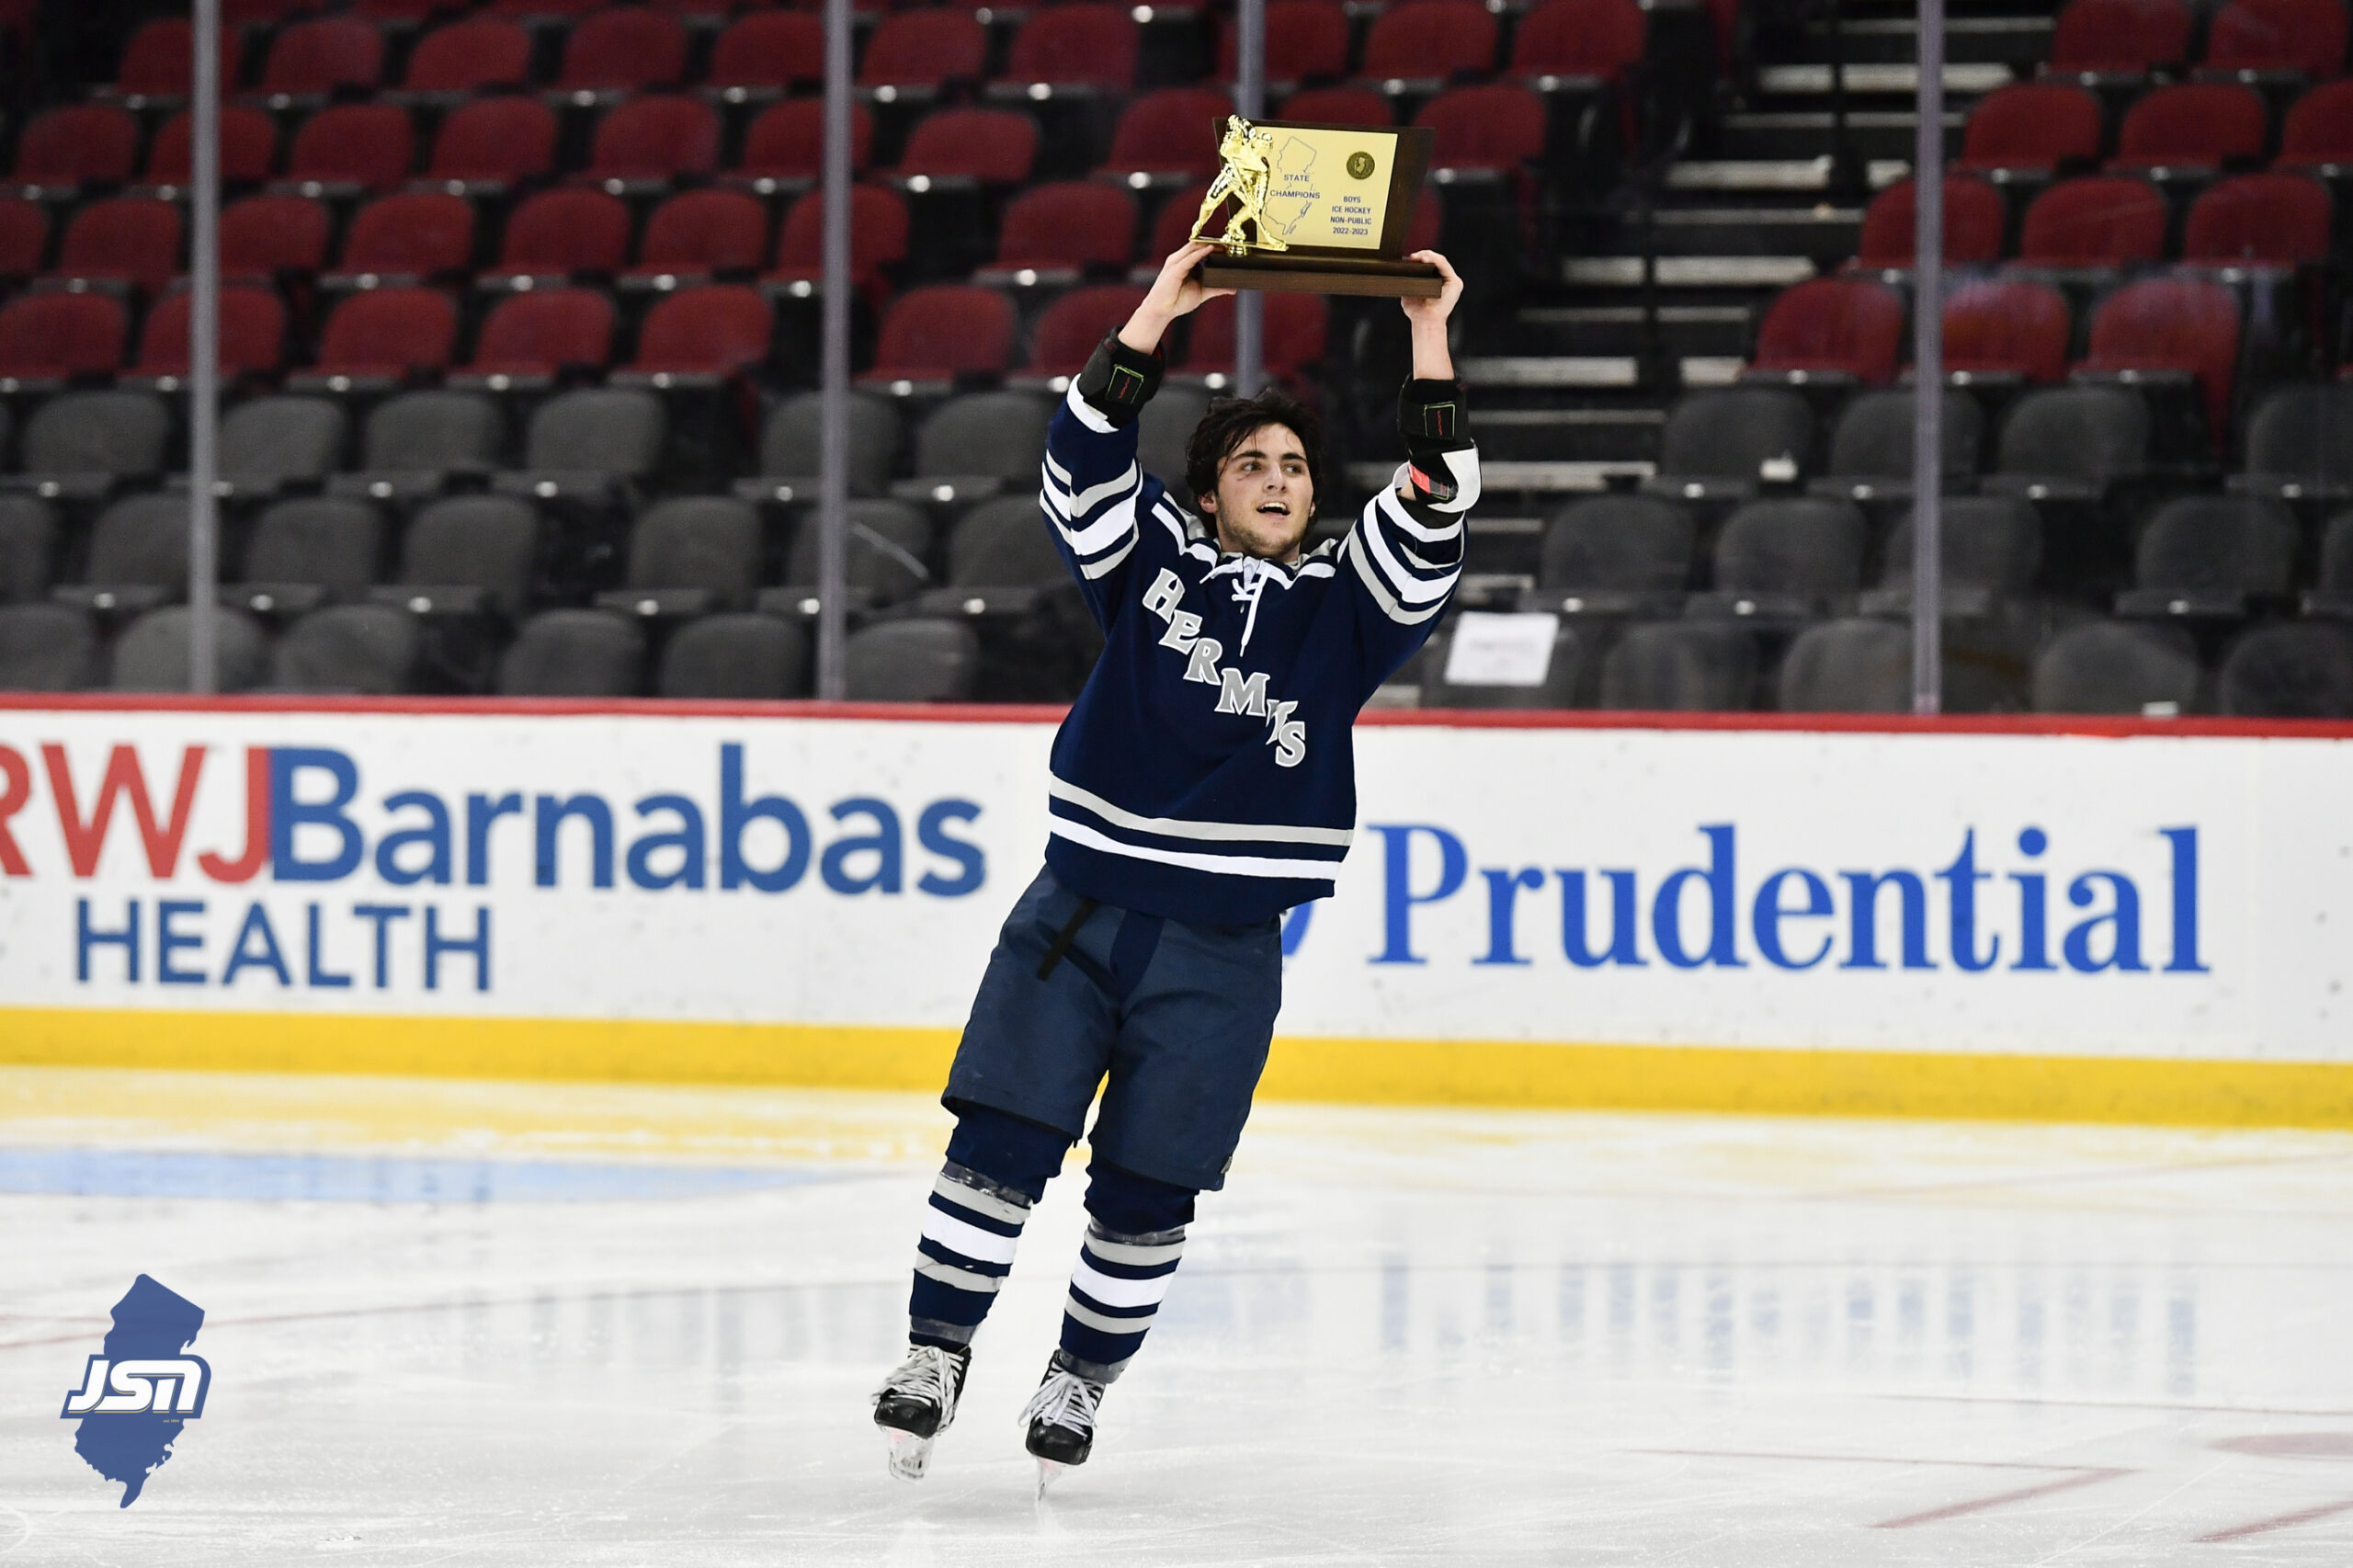 St. Augustine wins the 2023 NJSIAA Non-Public Ice Hockey State Championship